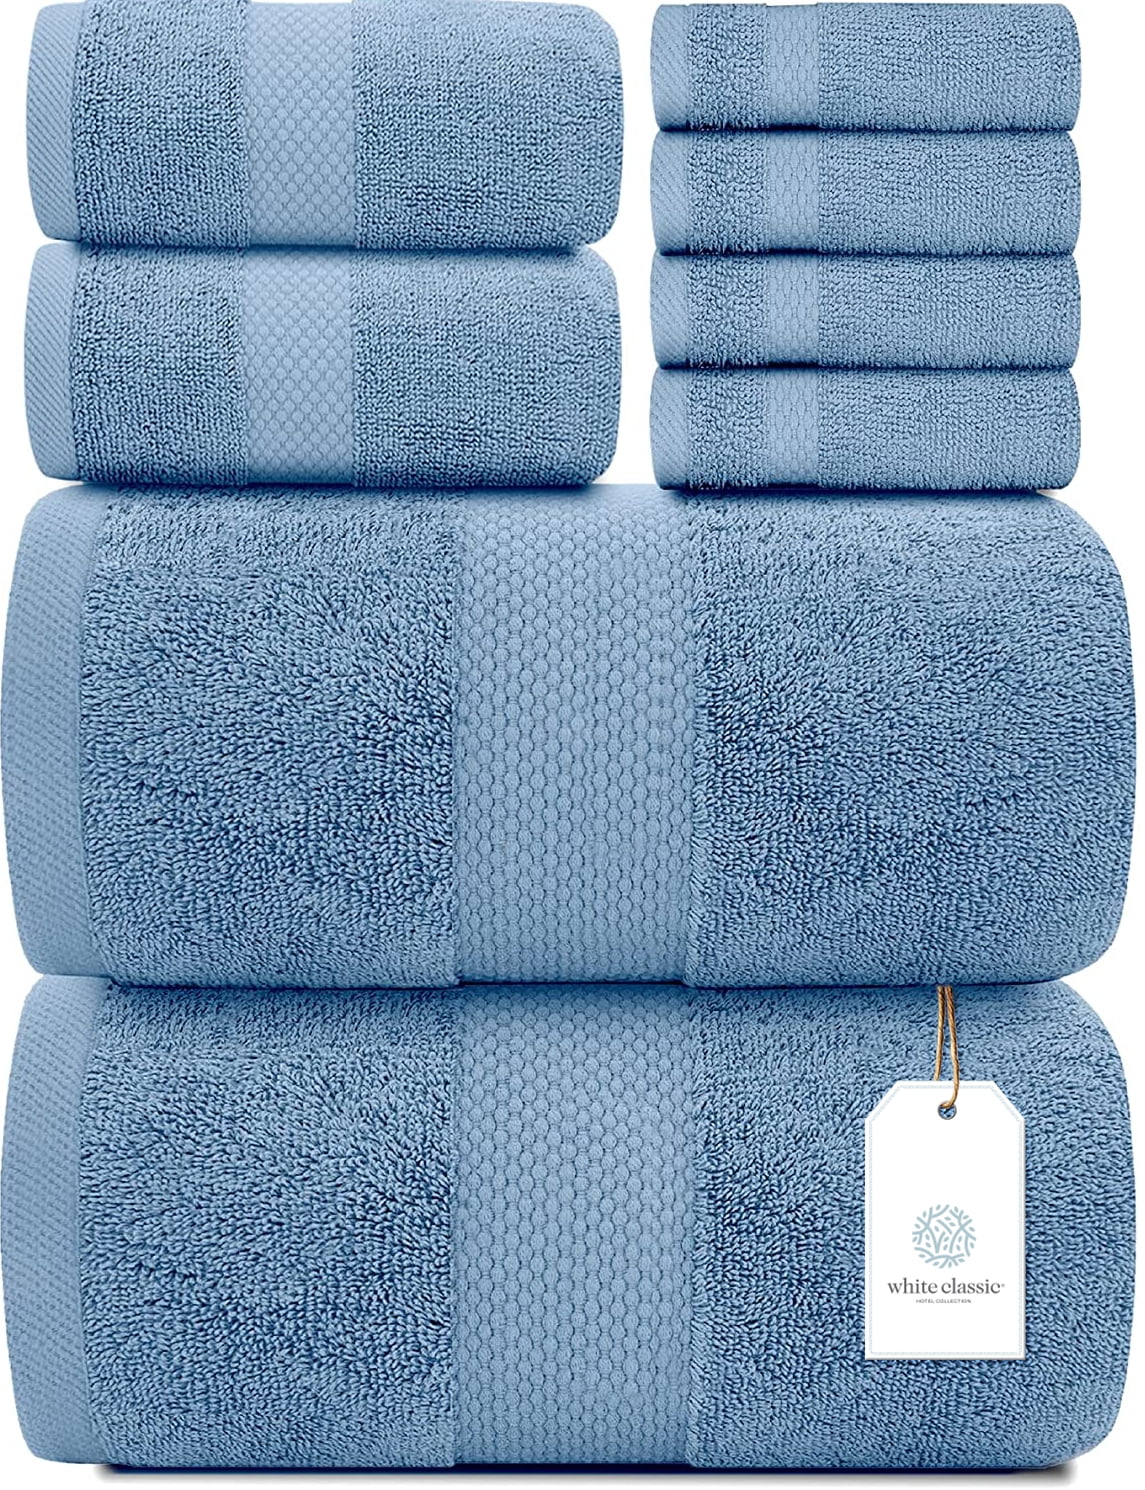 SEMAXE Luxury Bath Towels Set Include 2 Bath Towels 2 Hand Towels 4  Washcloths, Cotton Bathroom Towel with Hanging Loops and Smart Tag, Blue  and